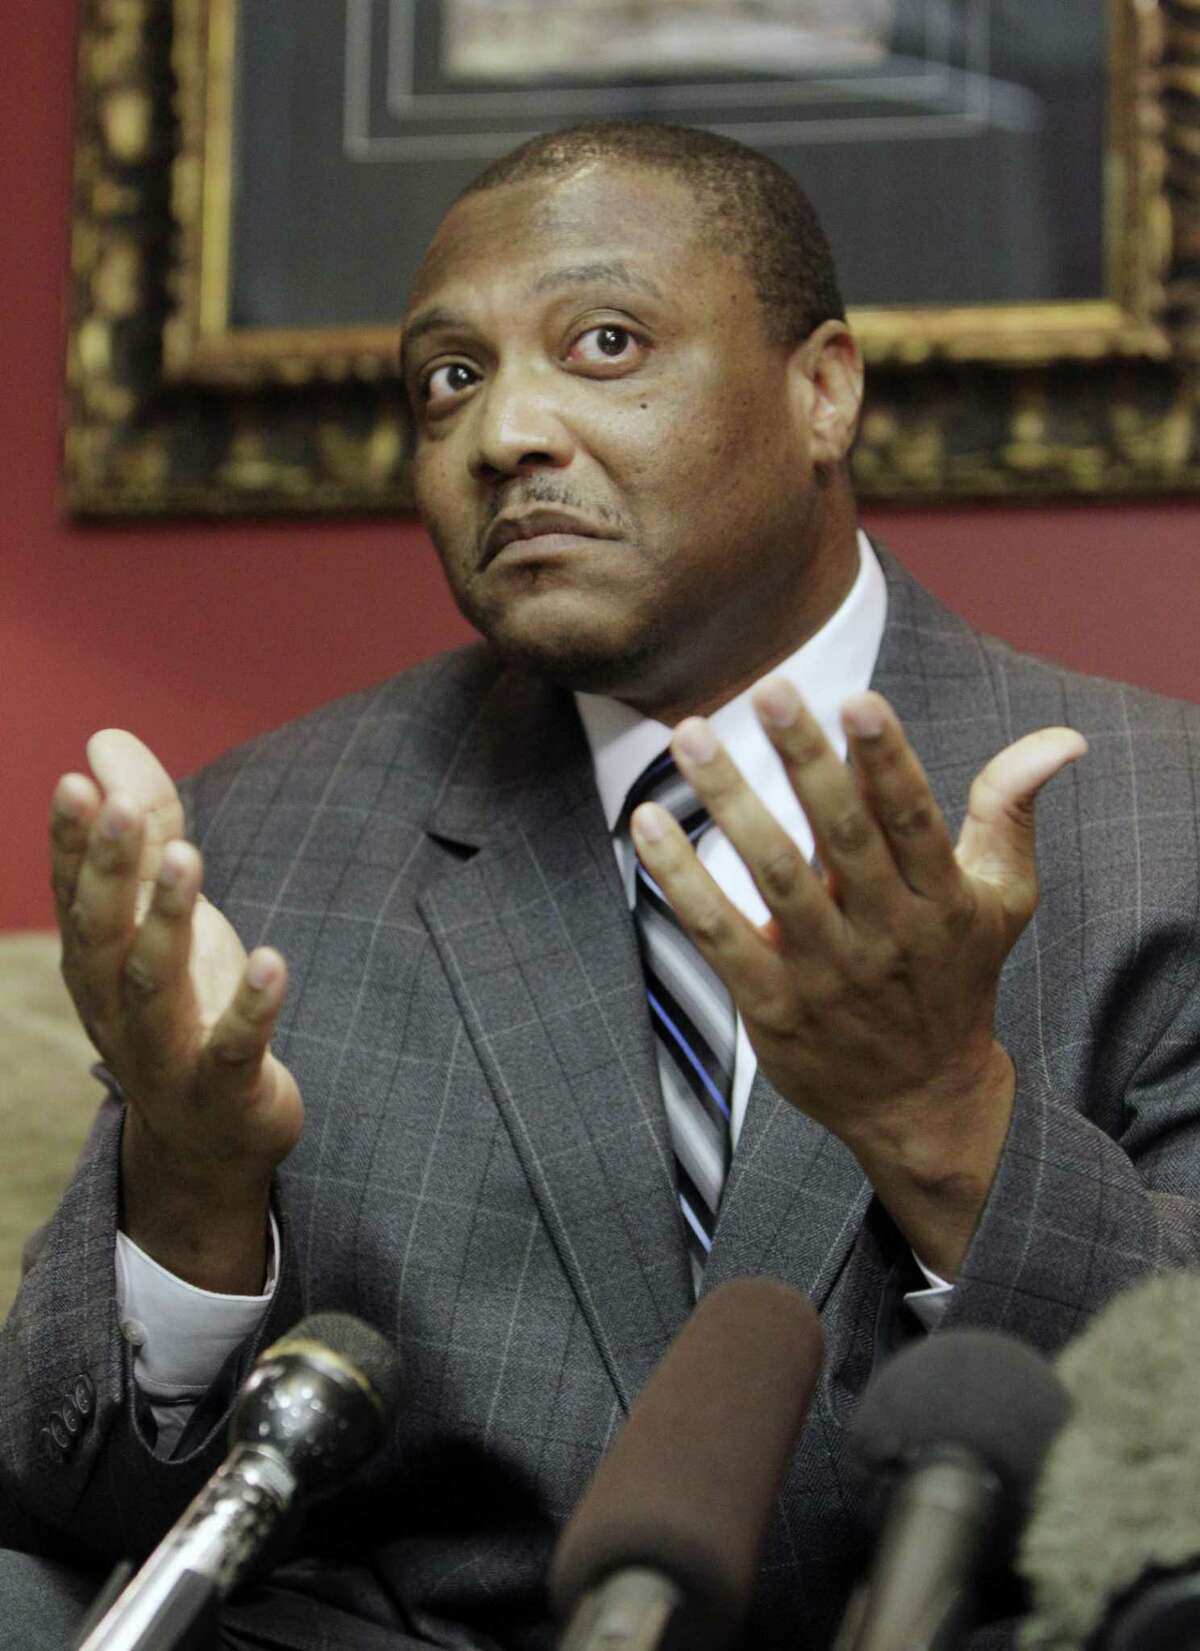 Anthony Graves, speaking here at a news conference in 2010 in Houston, was convicted after testimony by a jailhouse informant. After spending 18 years behind bars for the 1992 murders of a Somerville family, he was exonerated. A recently passed bill addresses the state’s use of jailhouse informants.